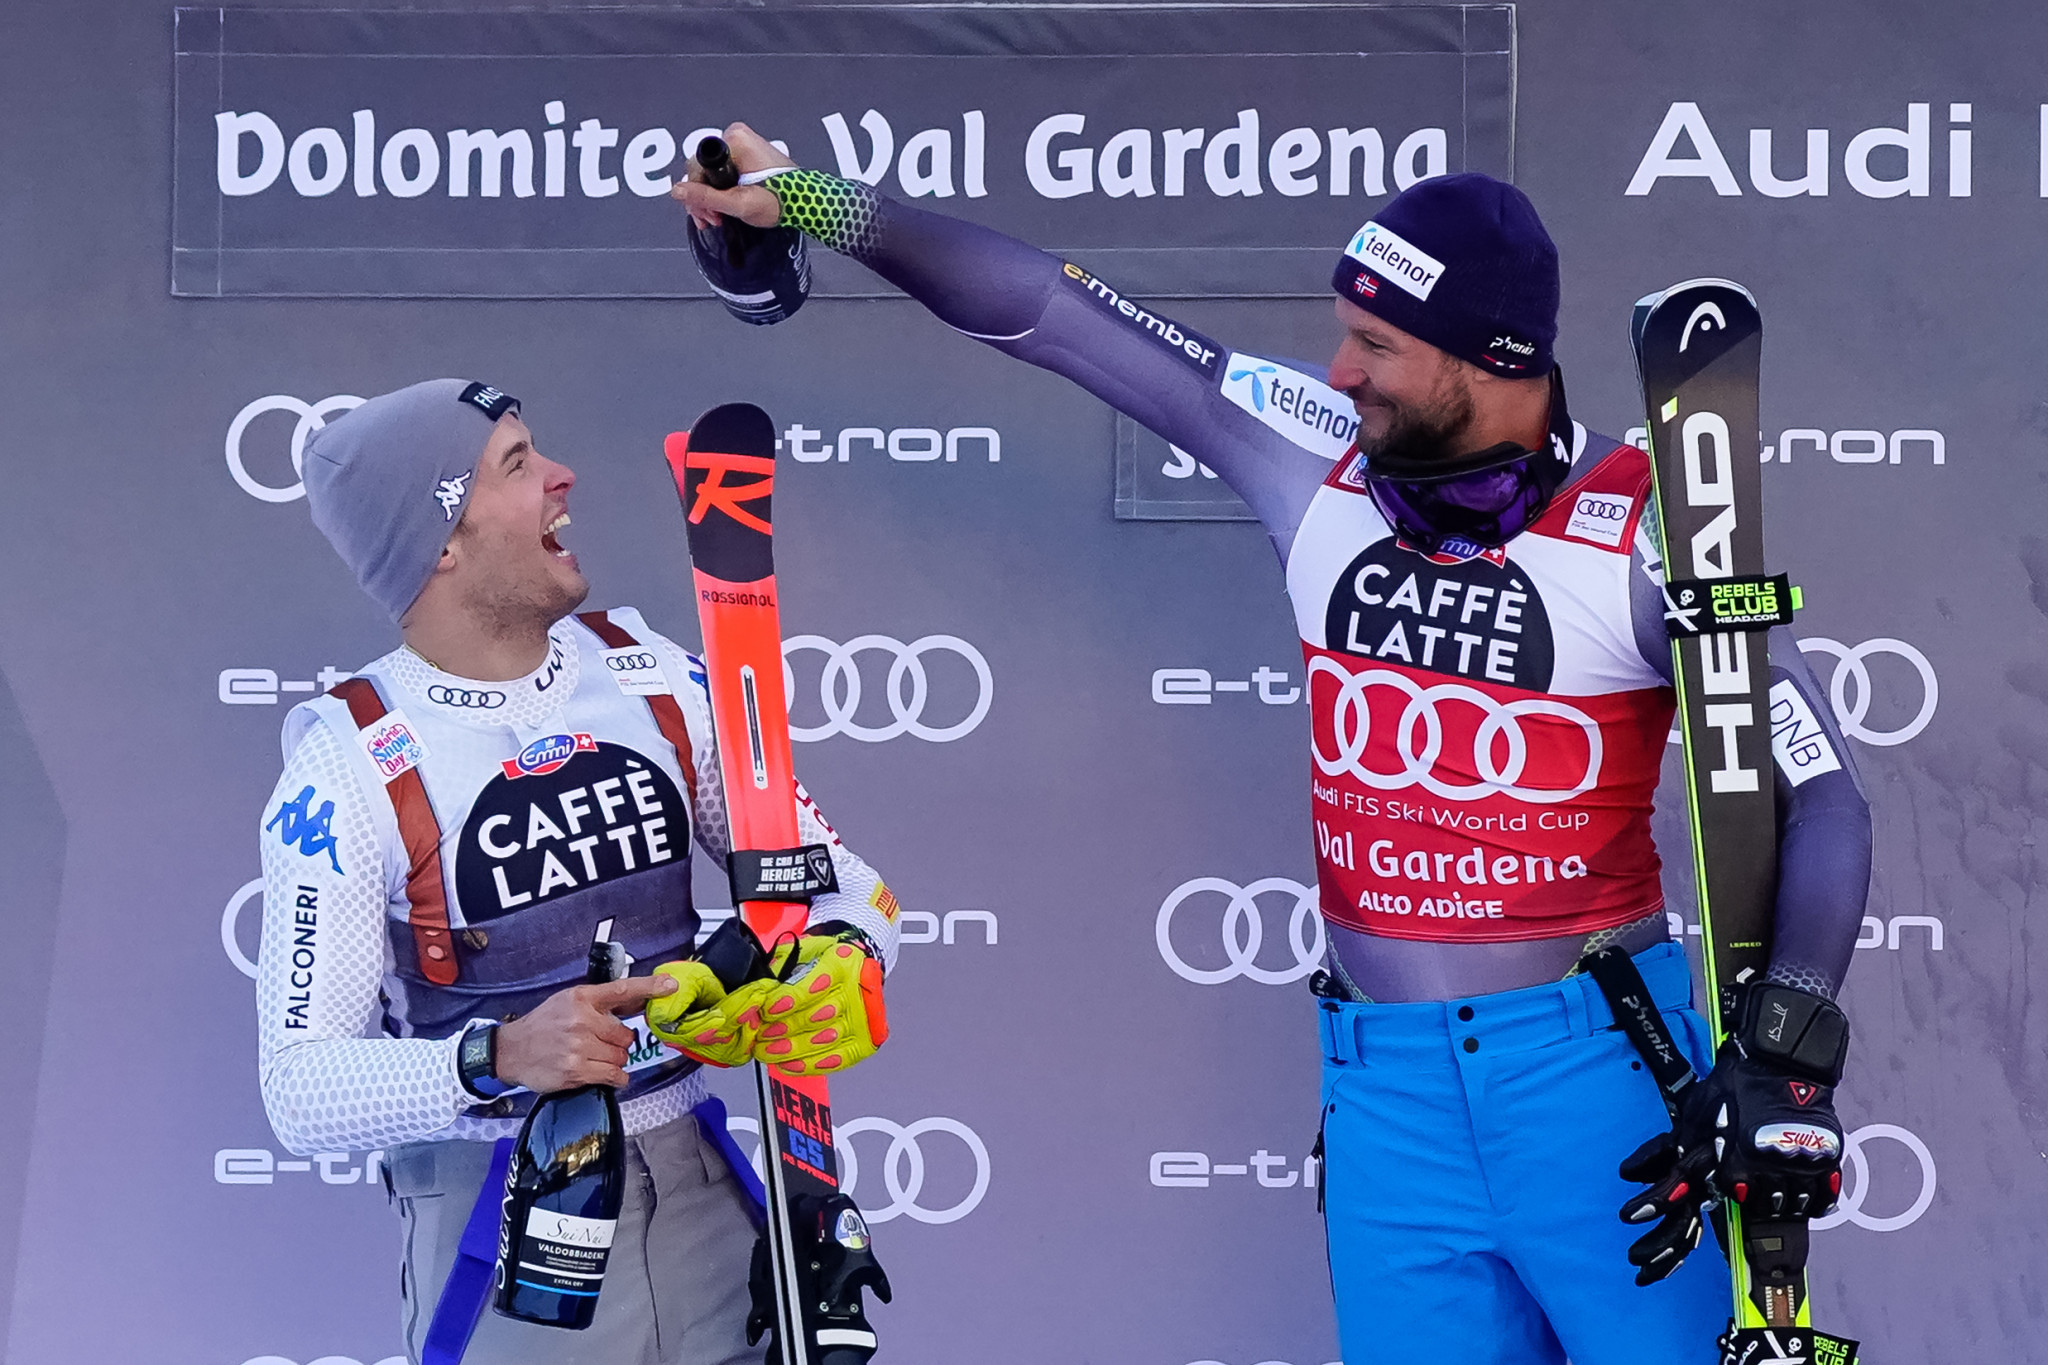  Svindal reaches Reich landmark with 36th FIS World Cup win in Val Gardena super-G